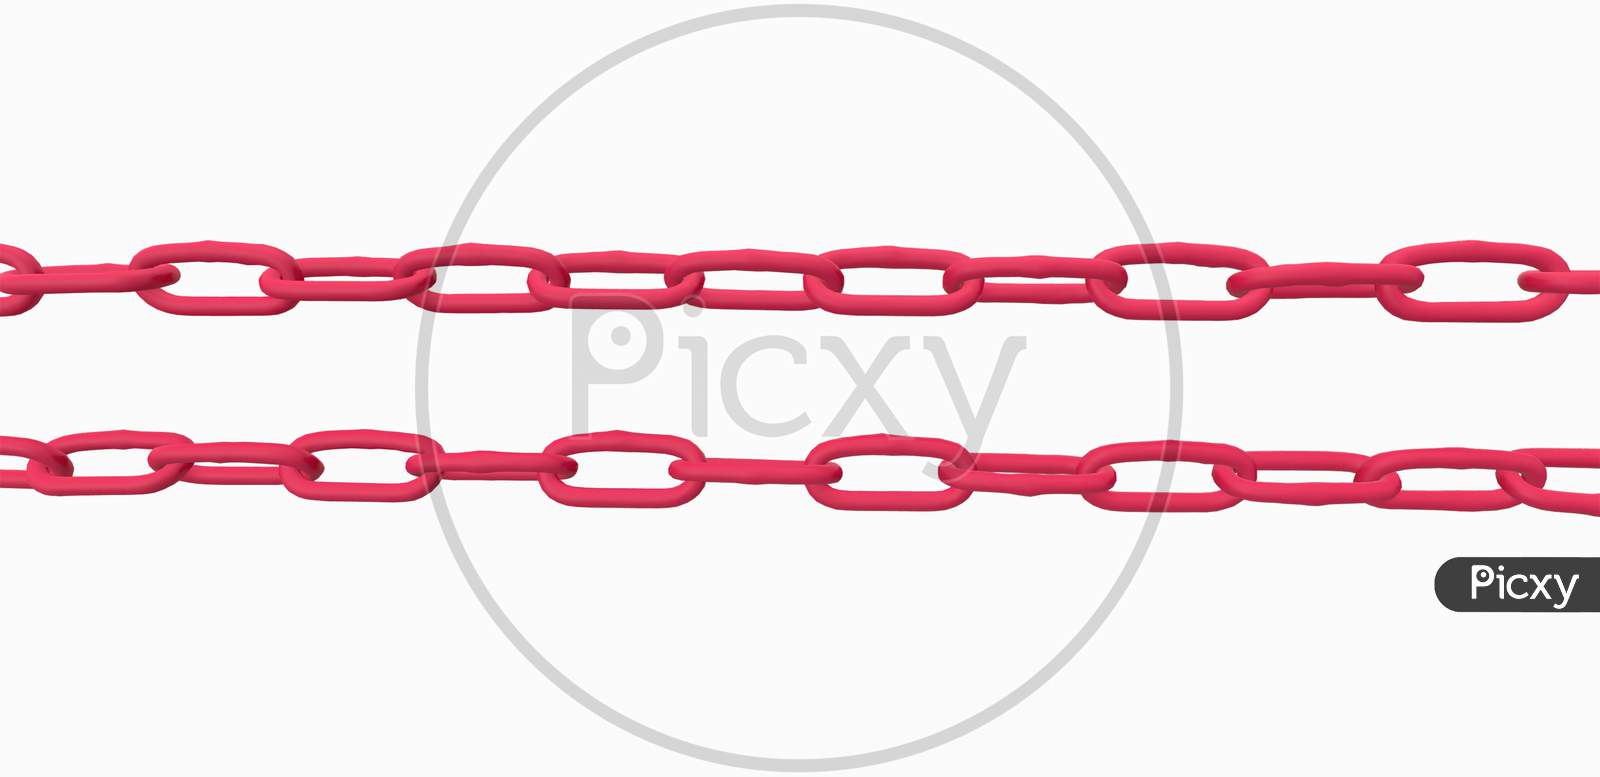 3D Render Colorful Chain Links Isolated On White Background